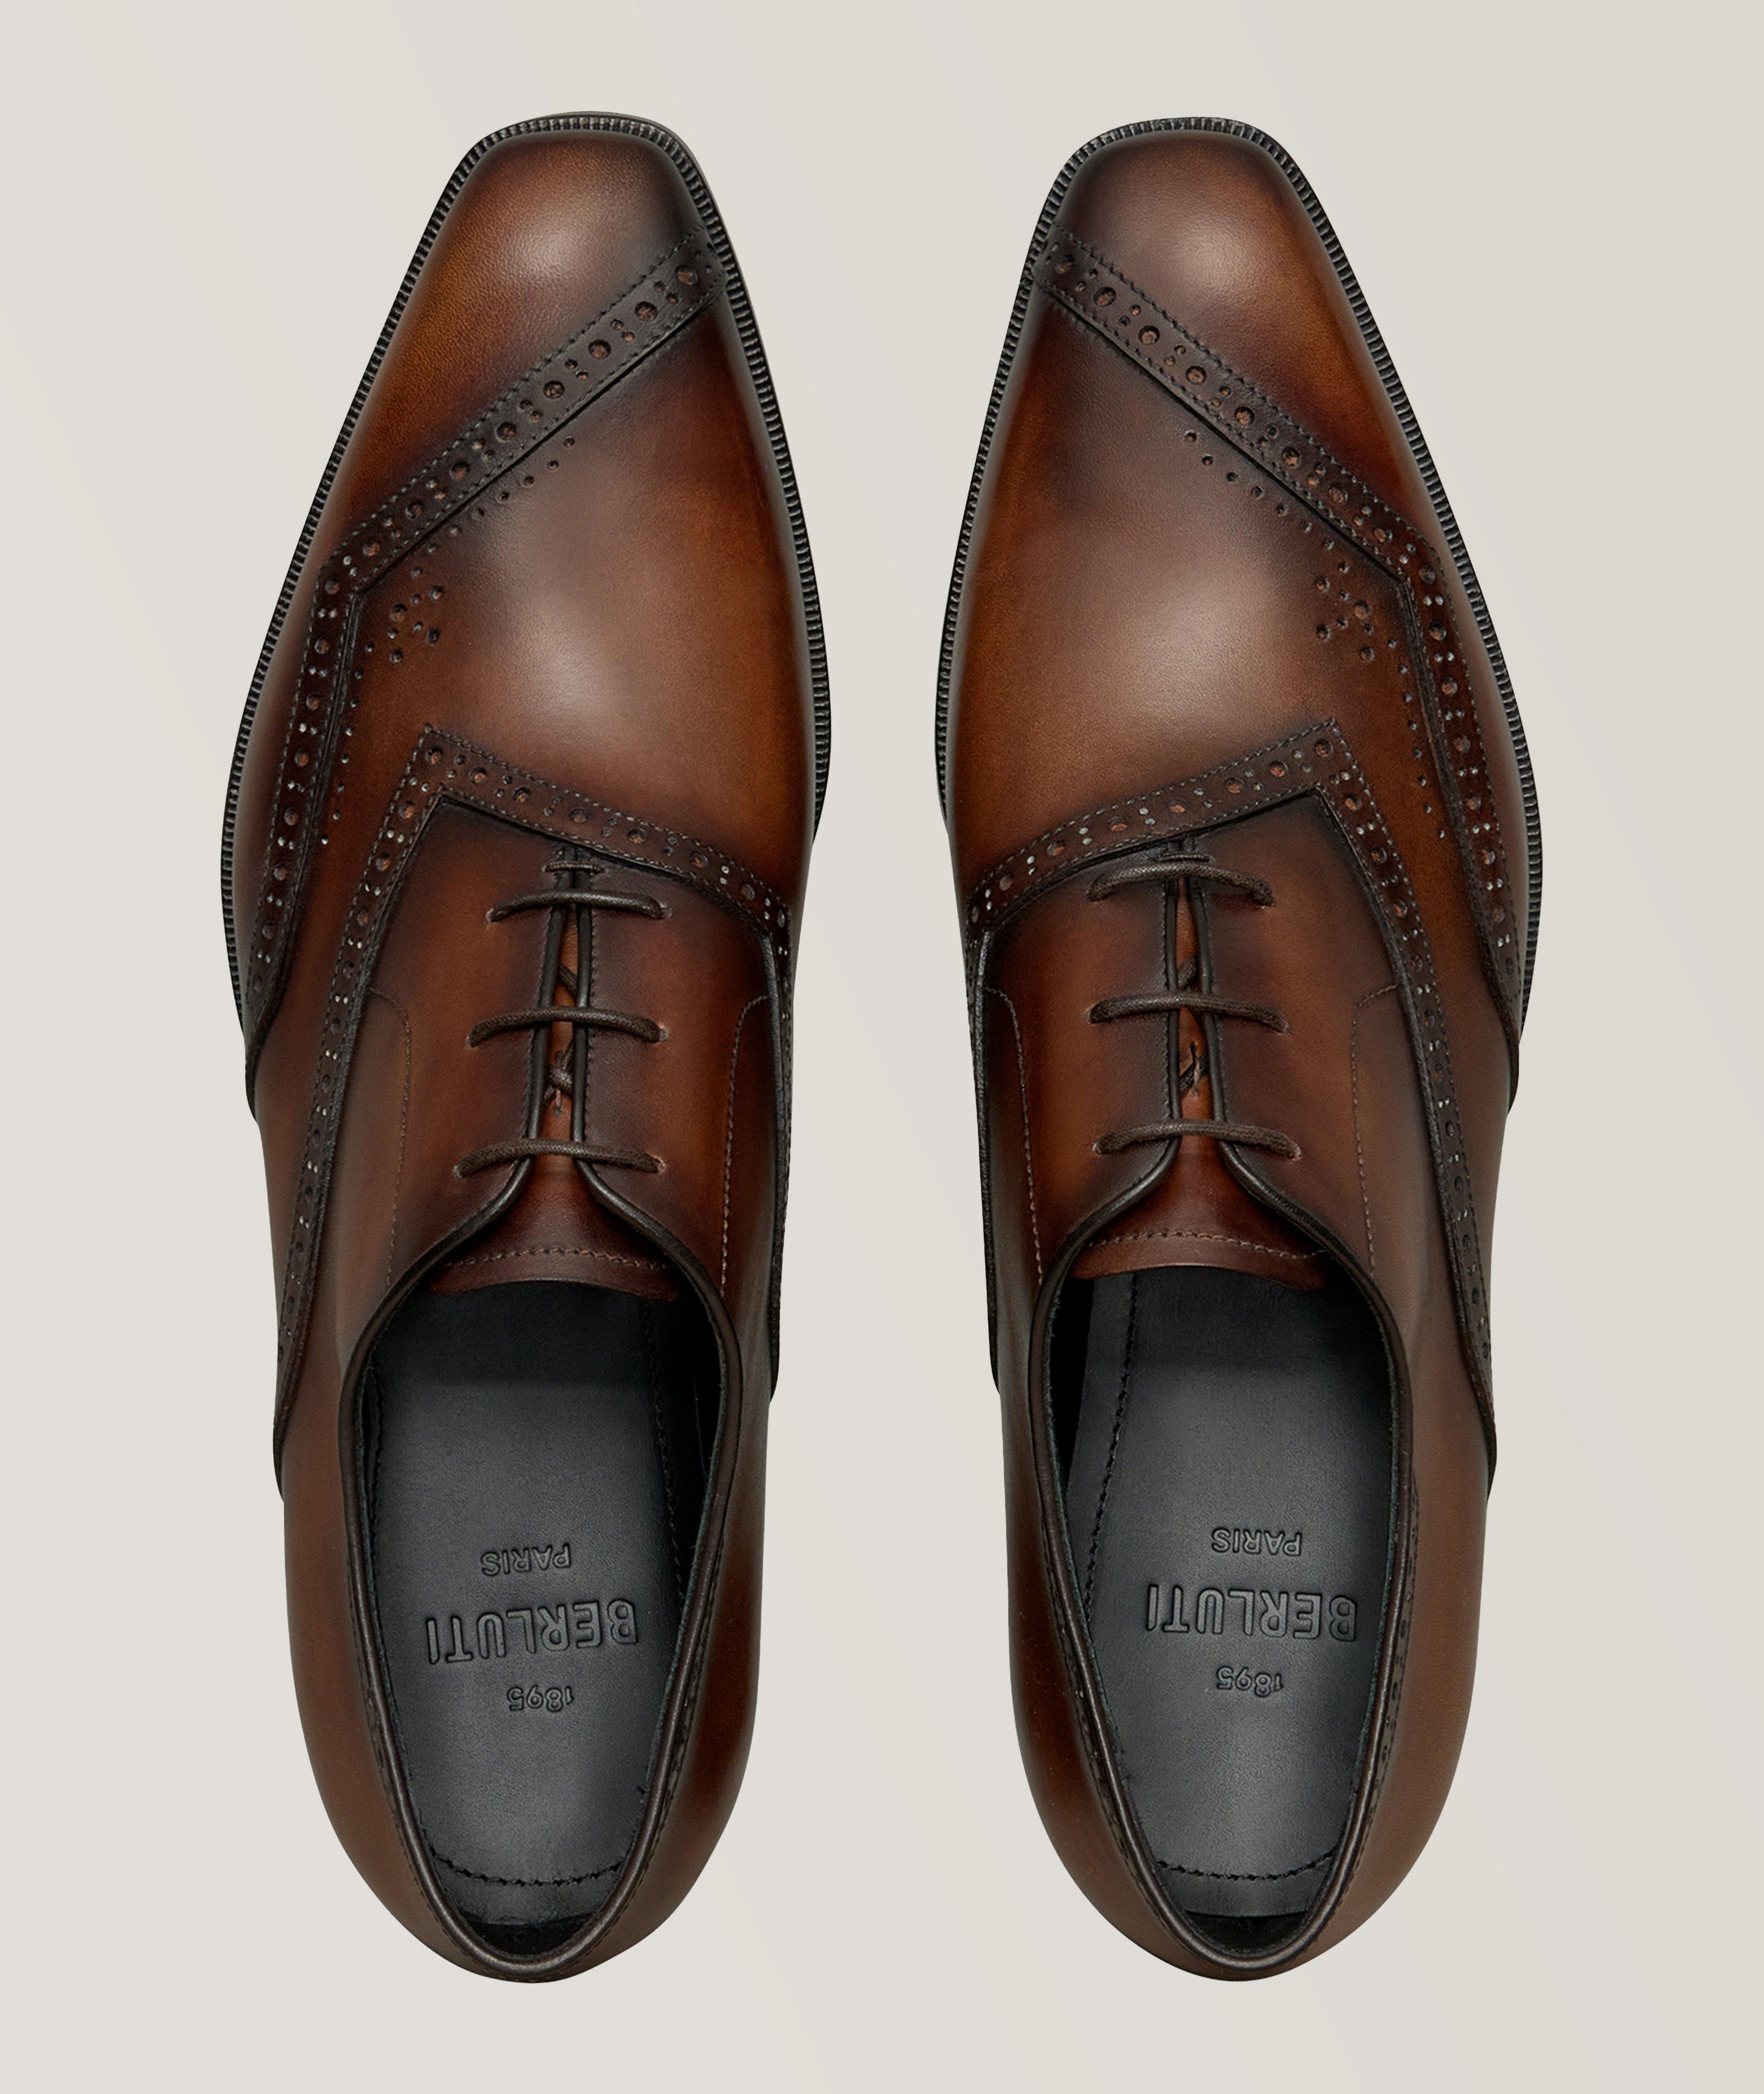 Asymmetric Broque Leather Oxford  image 2